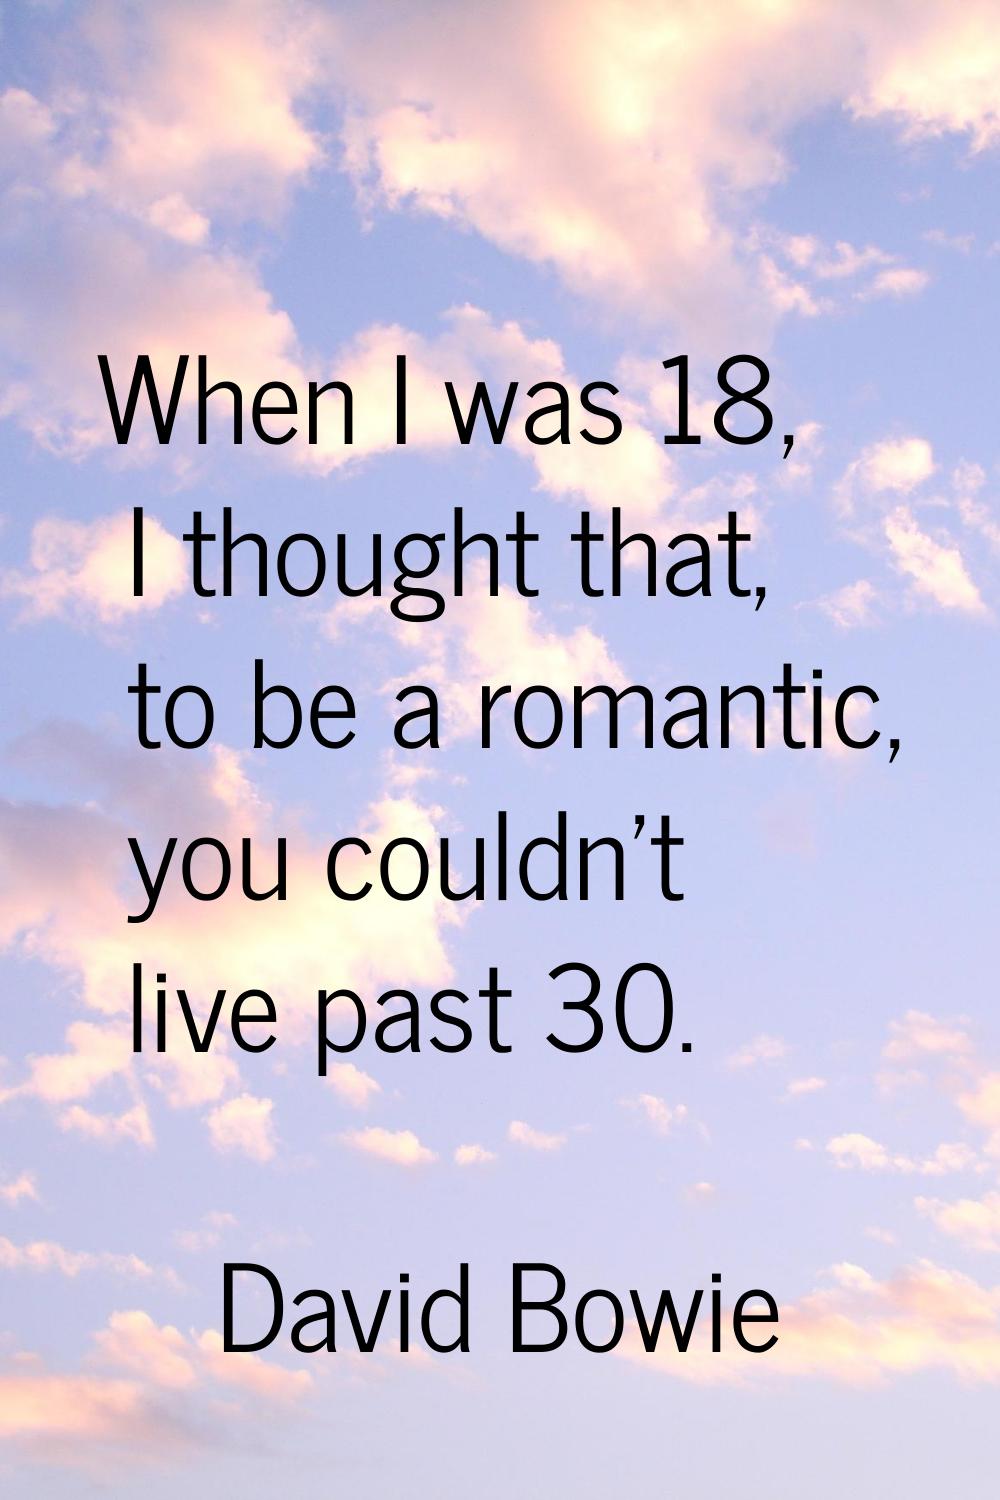 When I was 18, I thought that, to be a romantic, you couldn't live past 30.